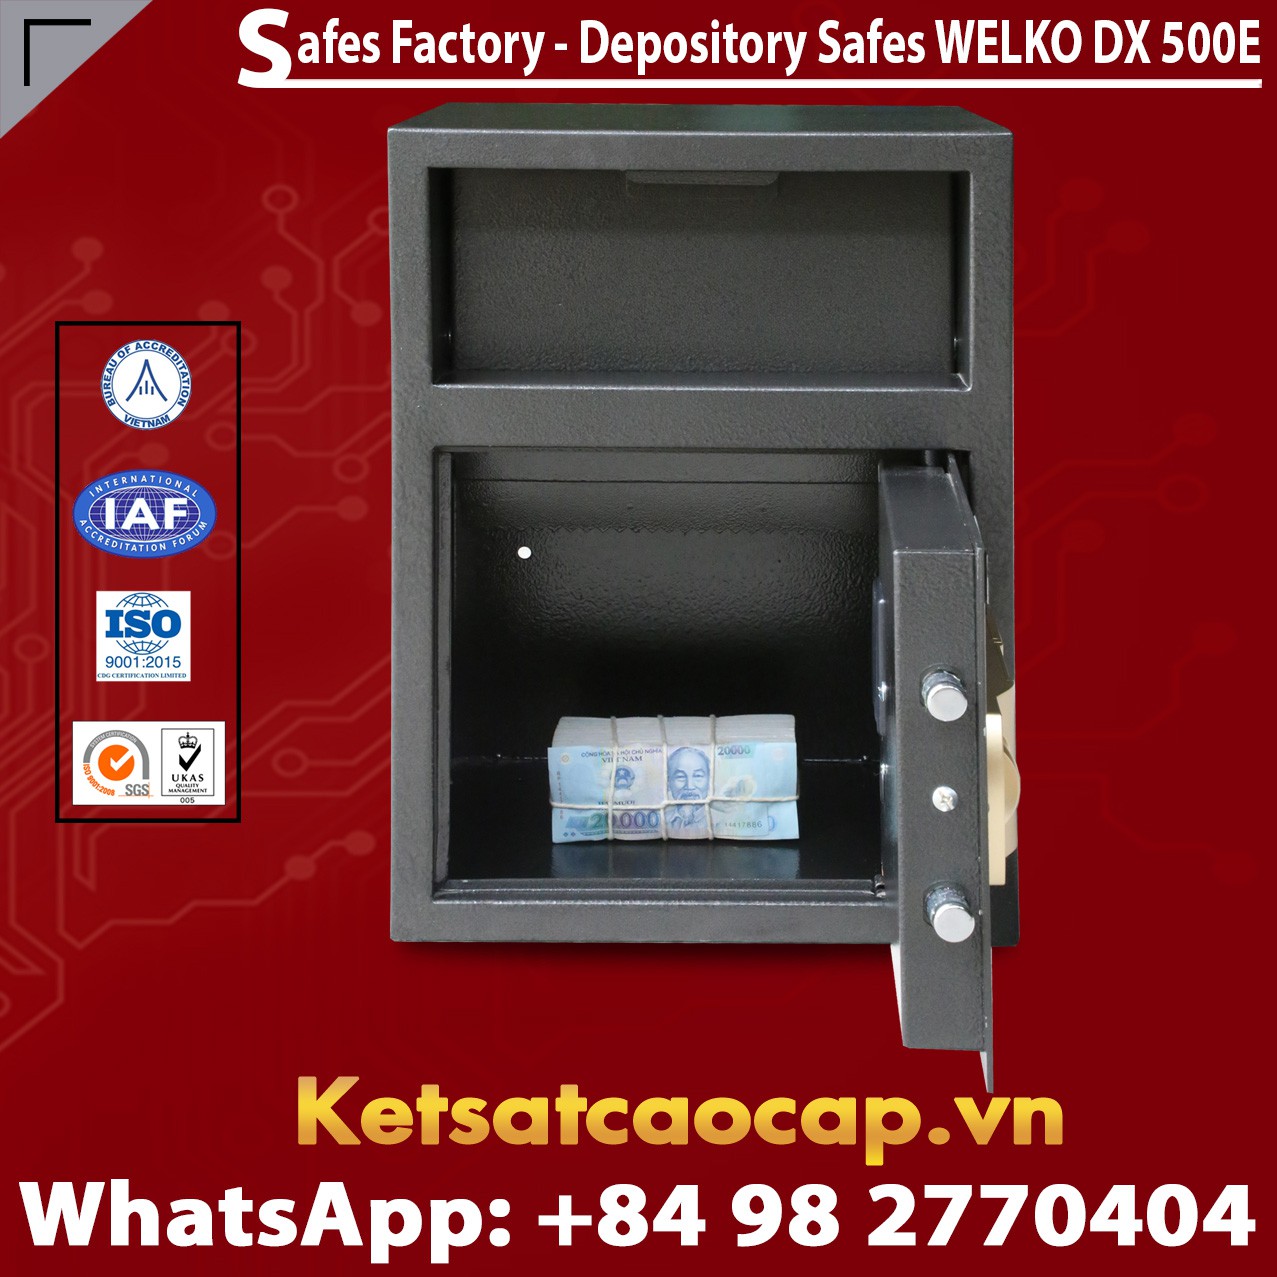 Office Safe Box Suppliers and Exporters xuất khẩu